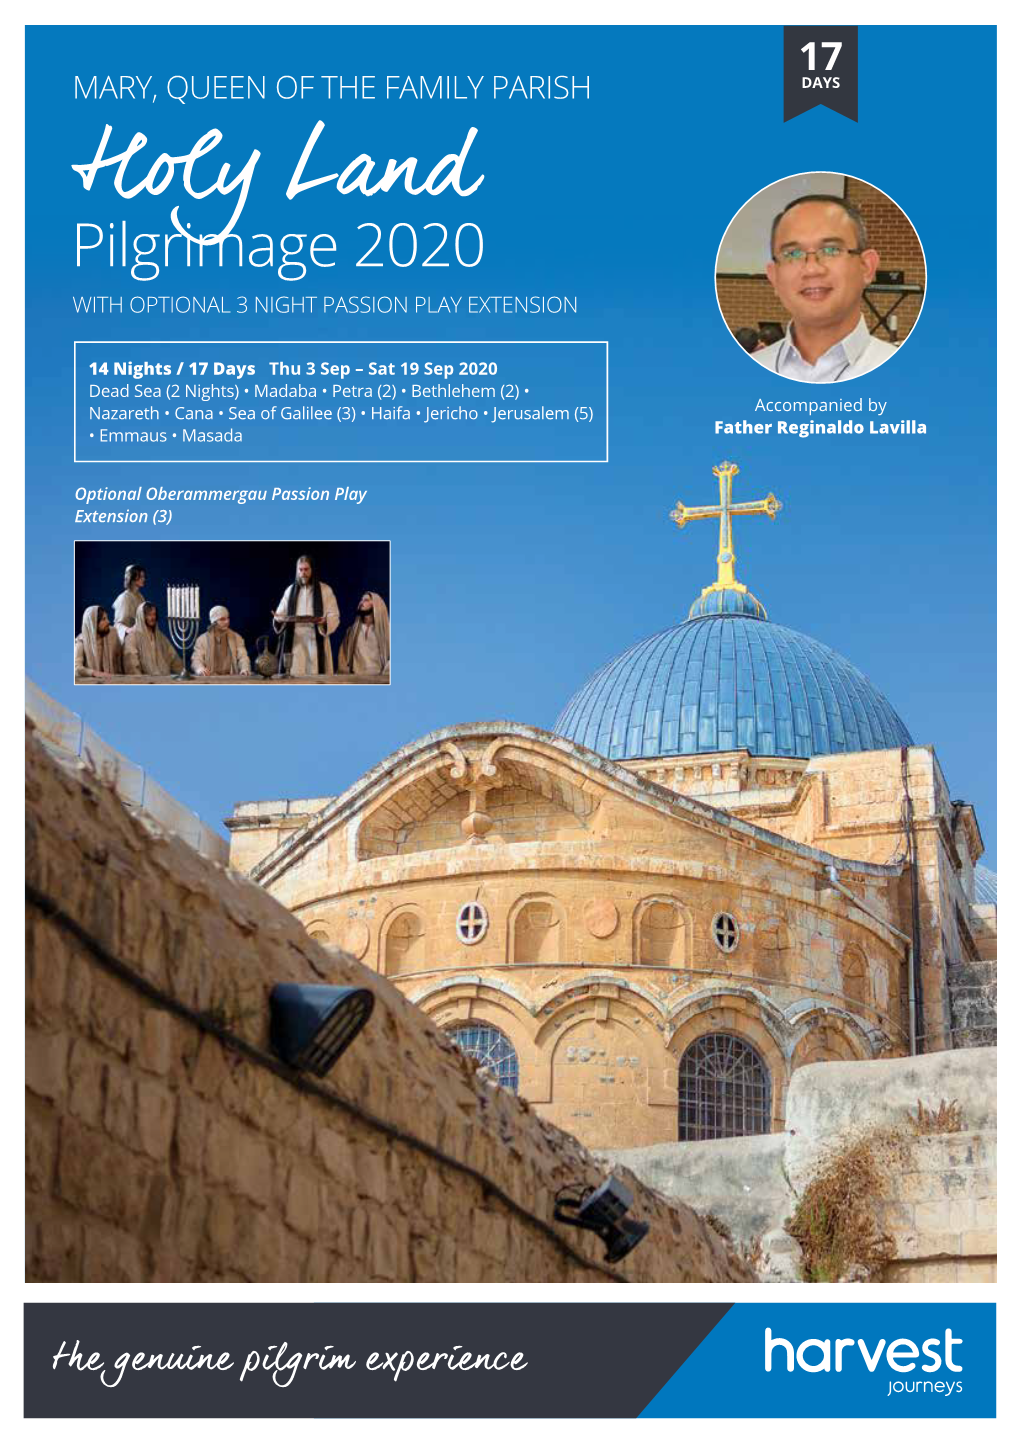 Holy Land Pilgrimage 2020 with OPTIONAL 3 NIGHT PASSION PLAY EXTENSION